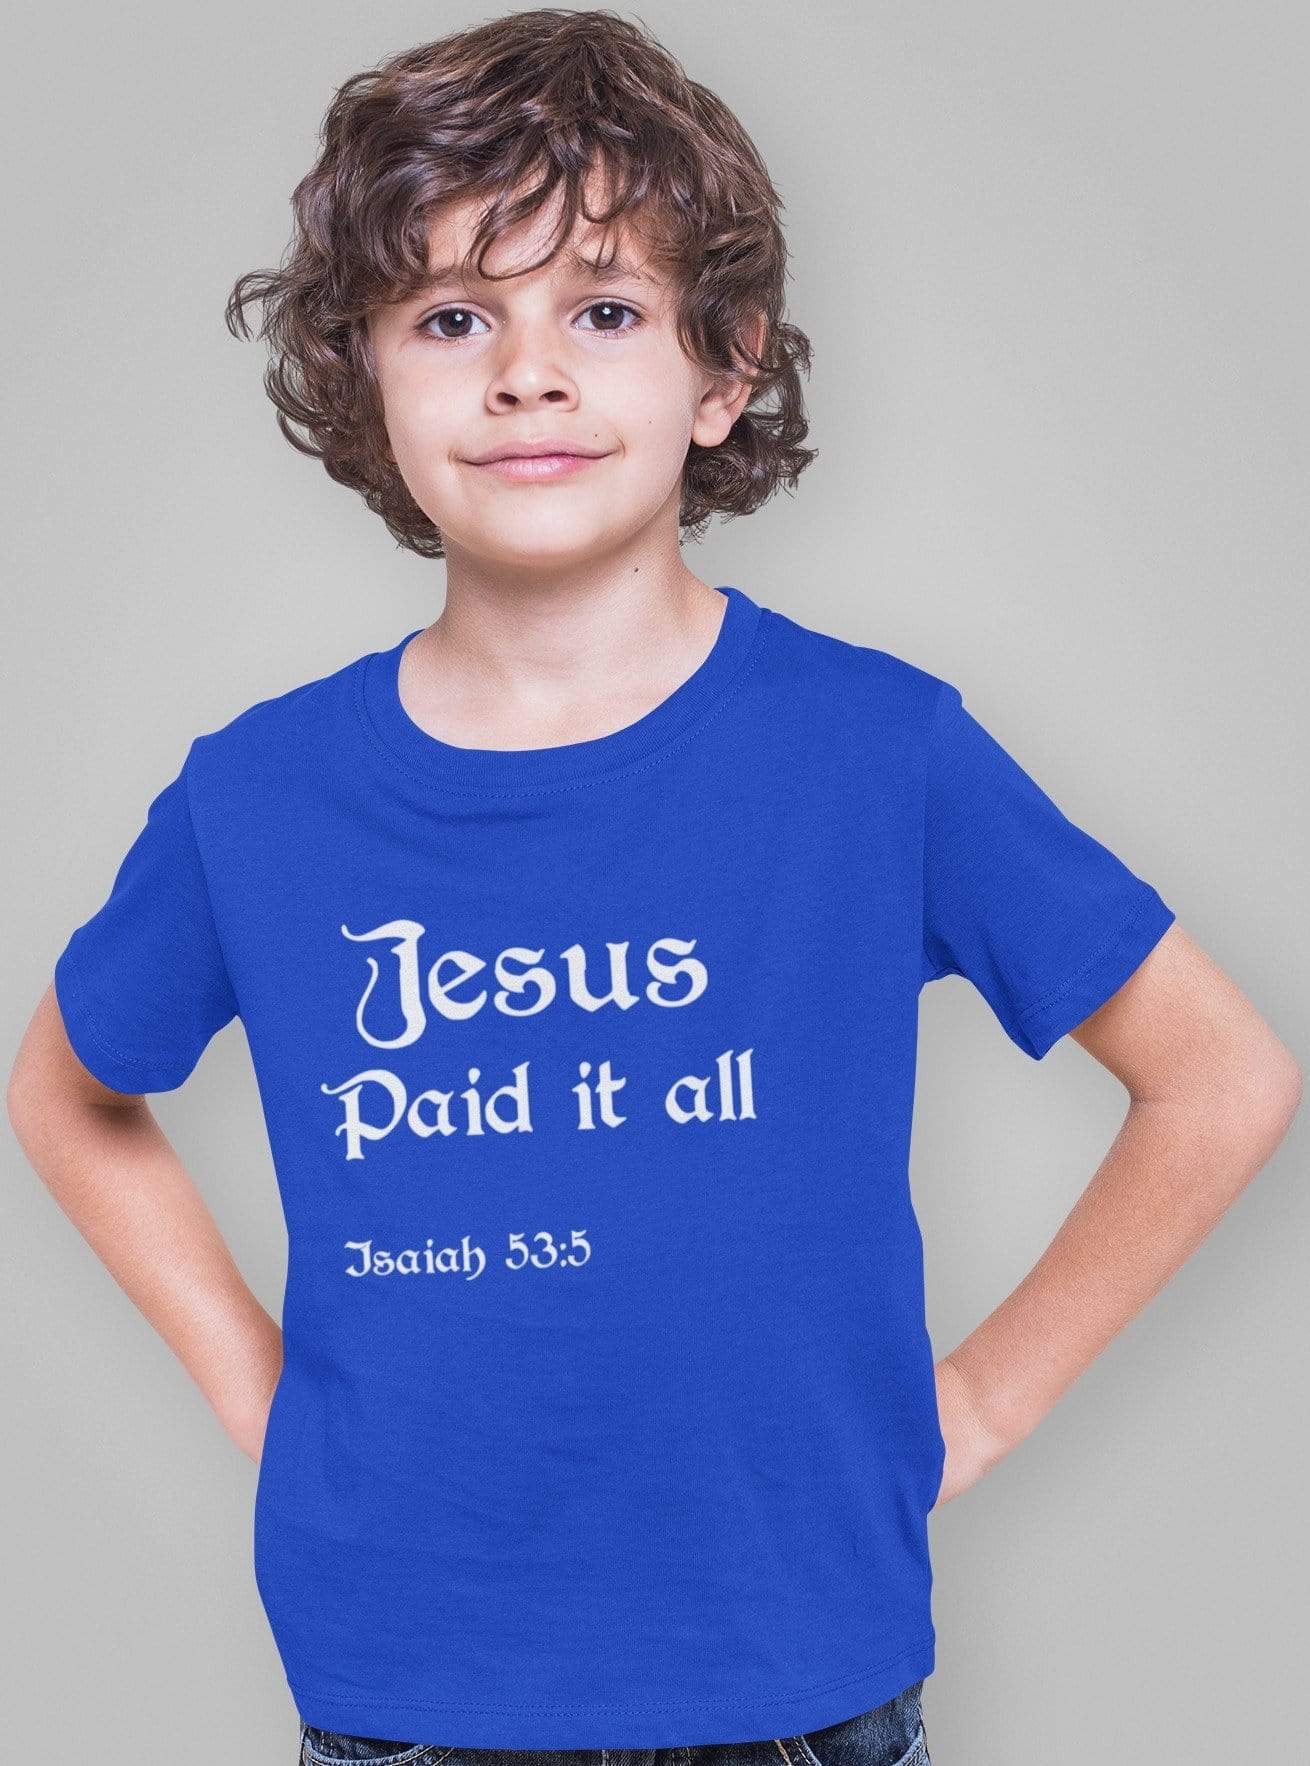 Living Words Kids Round Neck T Shirt Boy / 0-12 Mn / Royal Blue Jesus Paid it all